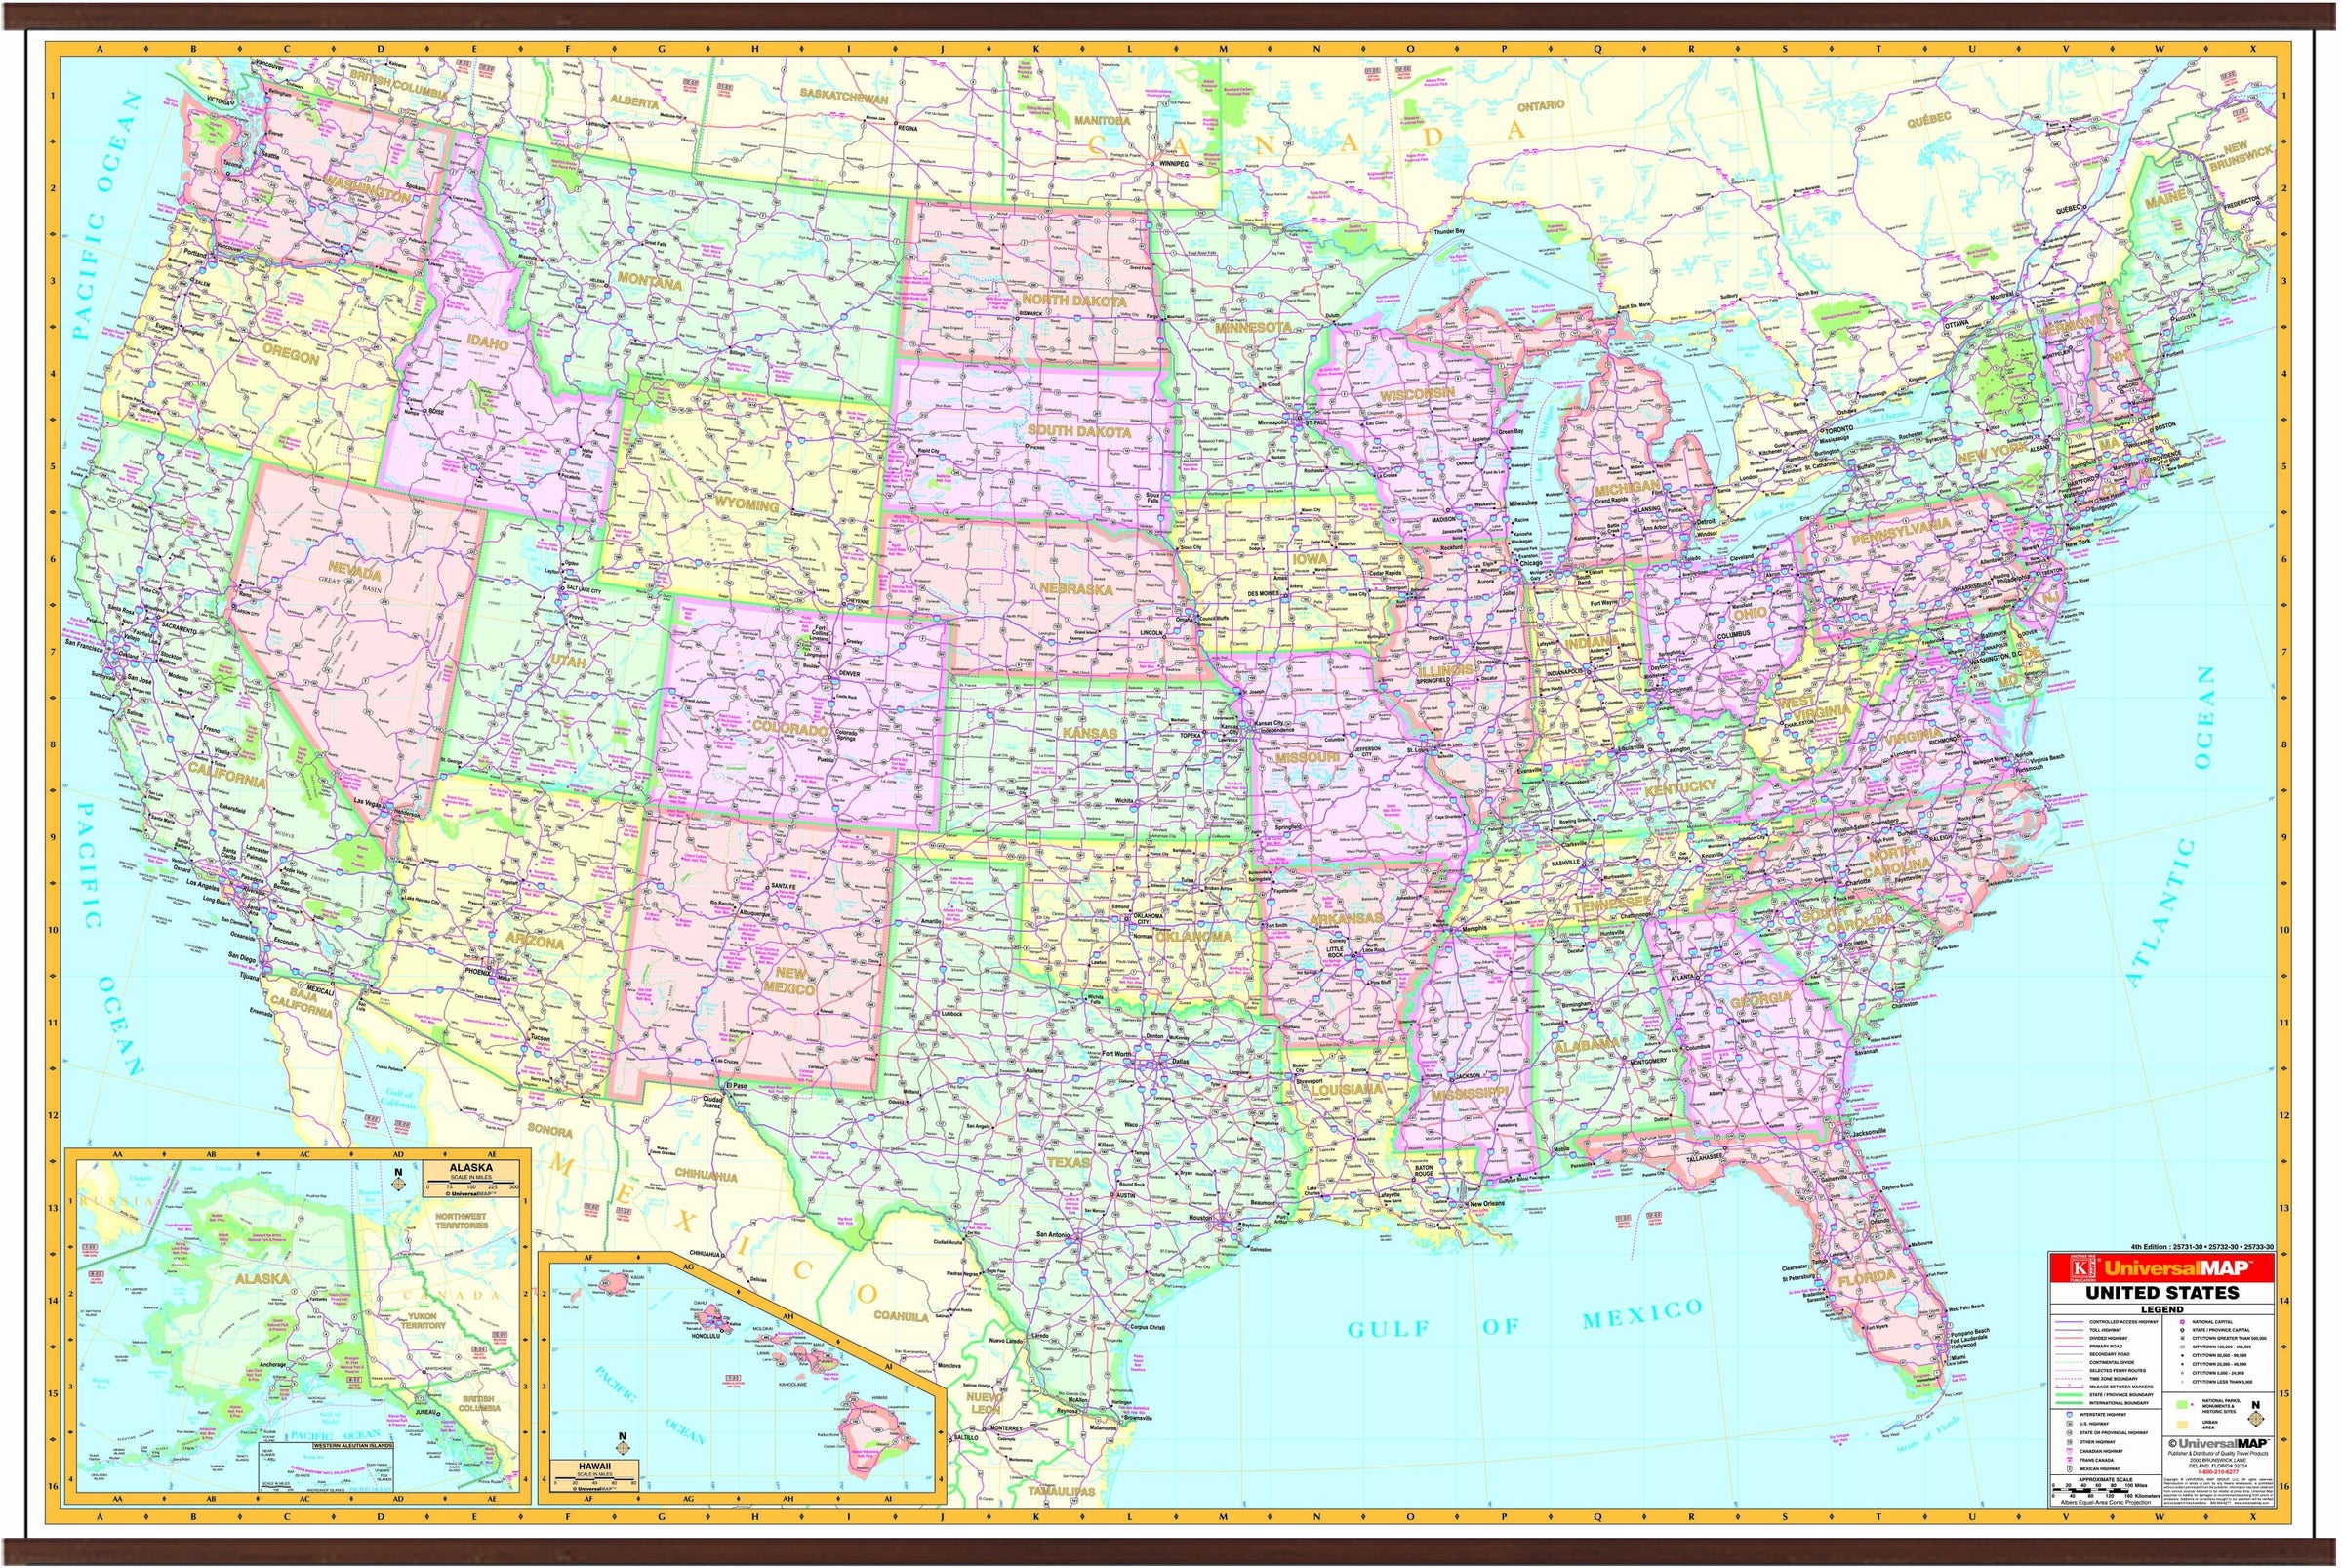 us interstate wall map 194 00 sku ka2573230 the united states wall map measuring 60 x 42 5 w x 3 6 h is published by universal map provides inset maps of alaska and hawaii includes a scale of 1 approximately 50 miles printed on a